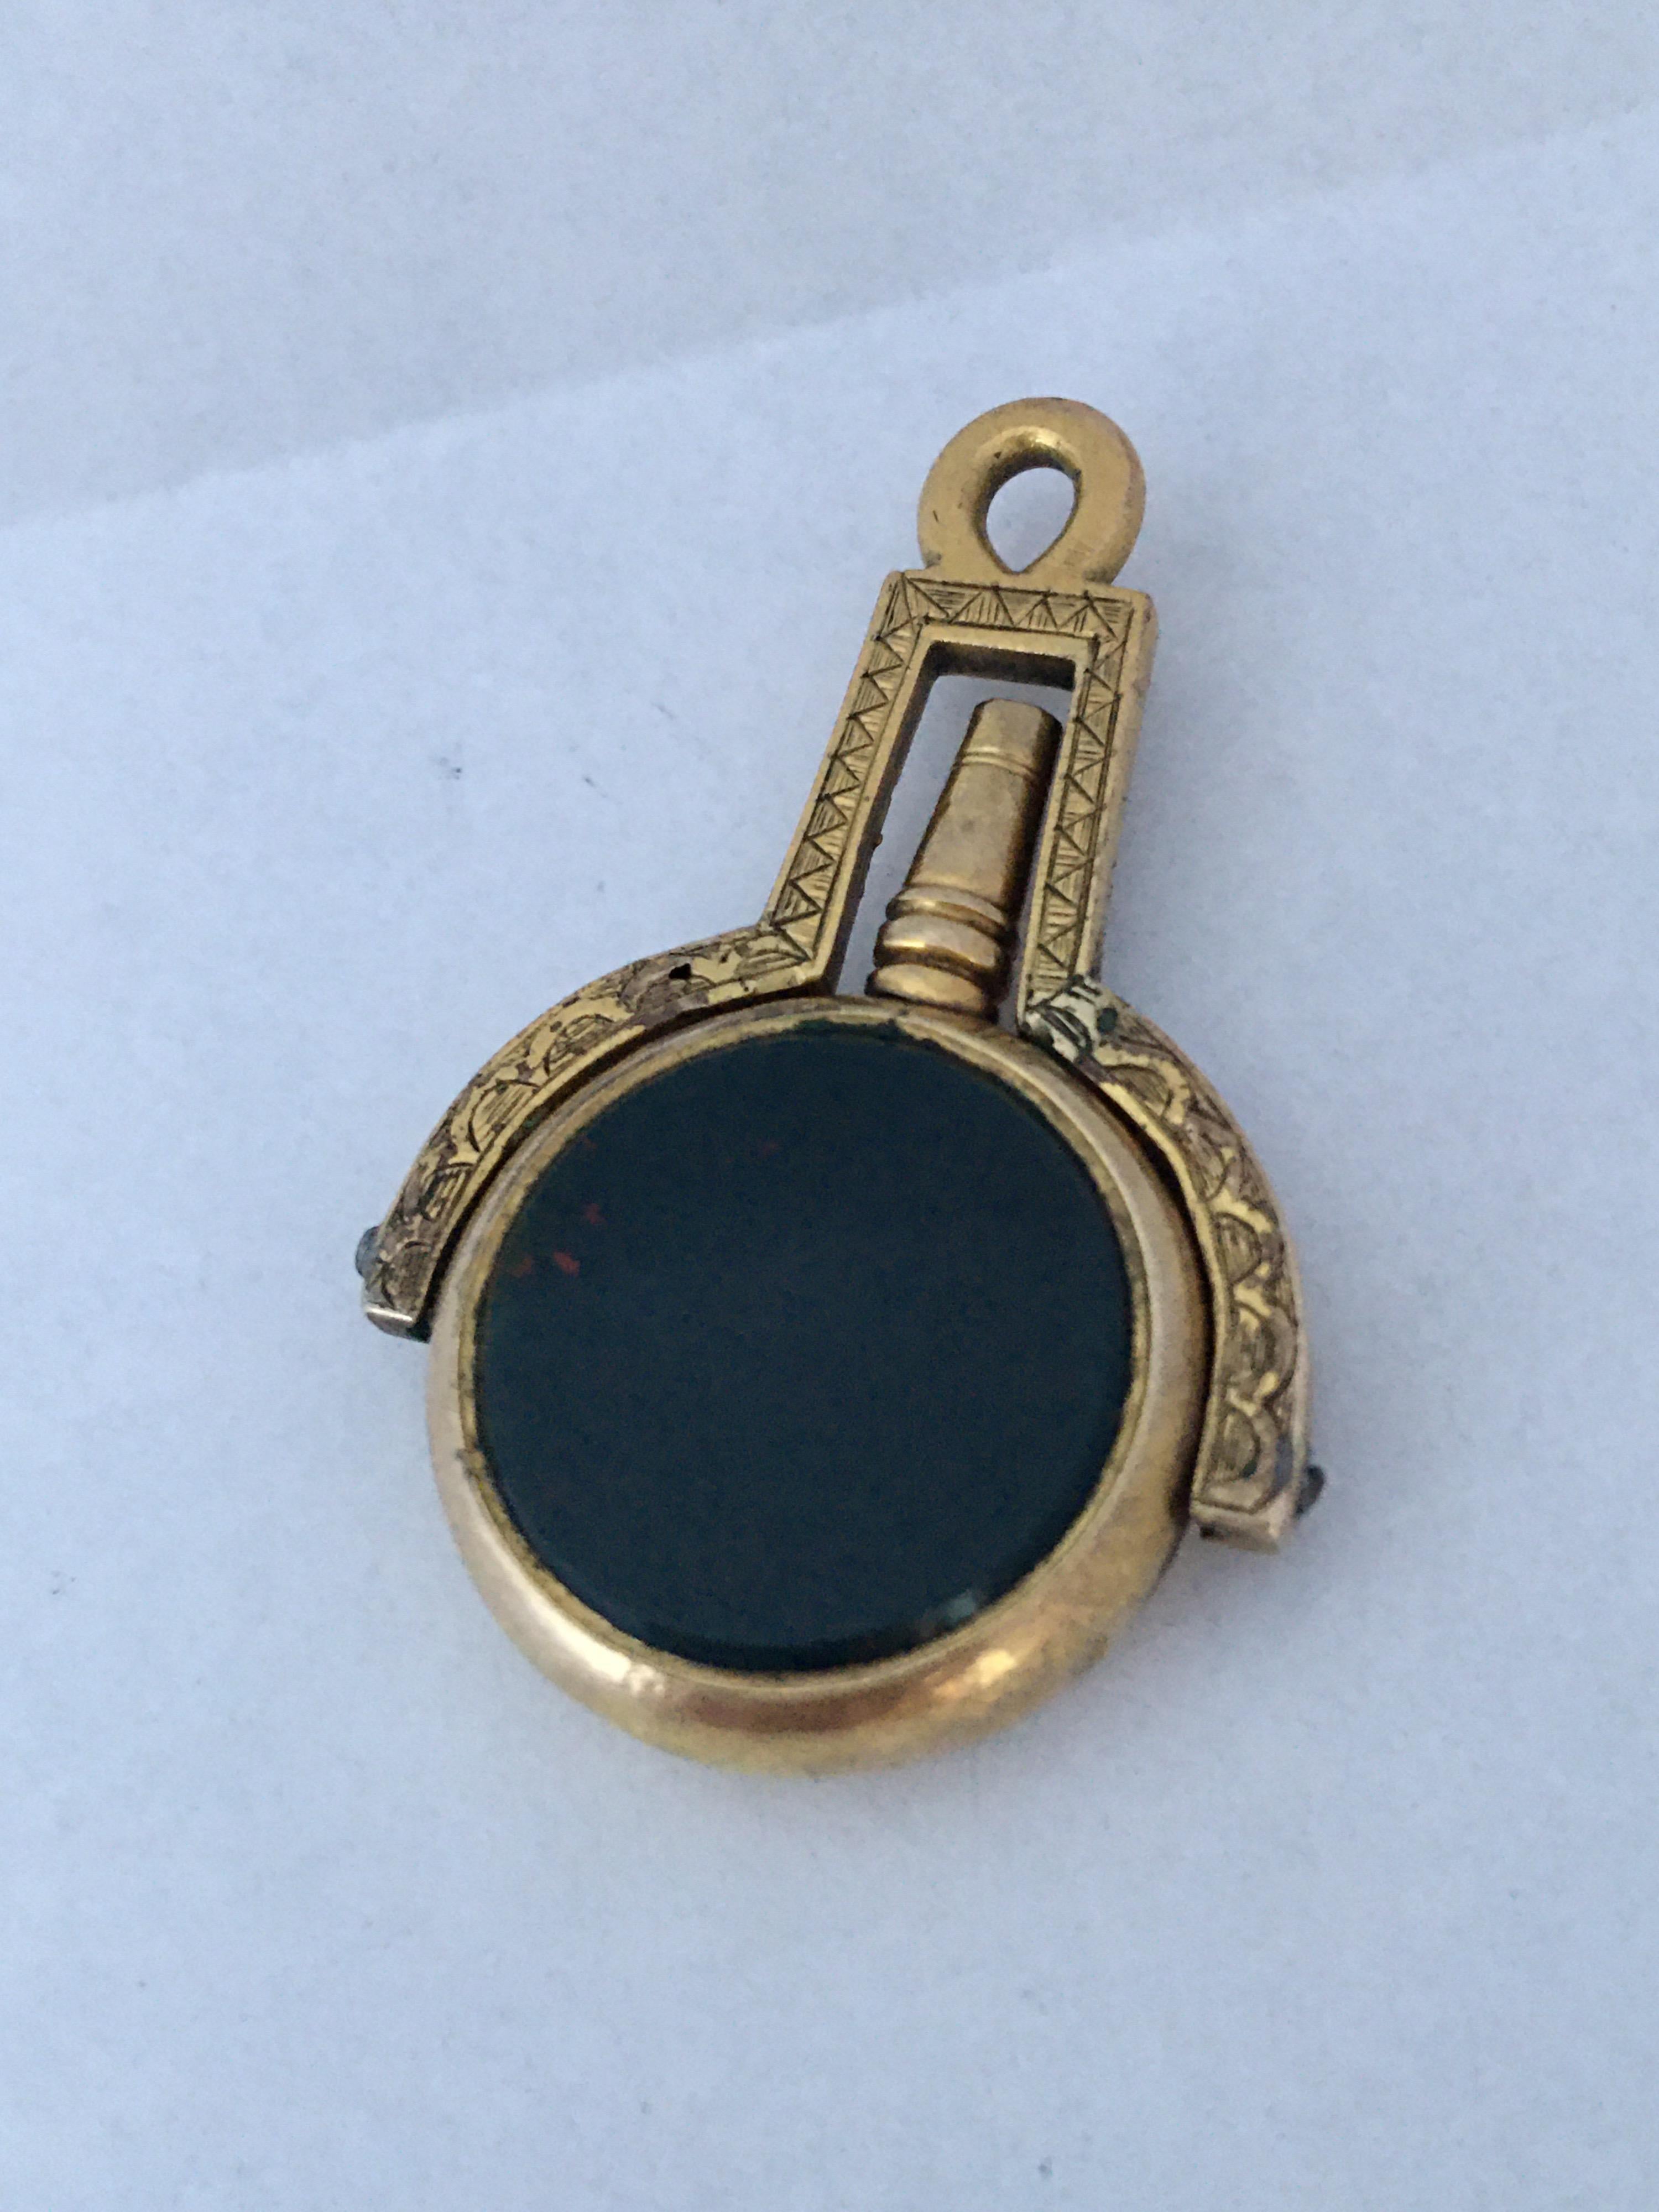 Victorian Gold Filled Sardonyx and Bloodstone Pocket Watch Key / Fob Pendant For Sale 2